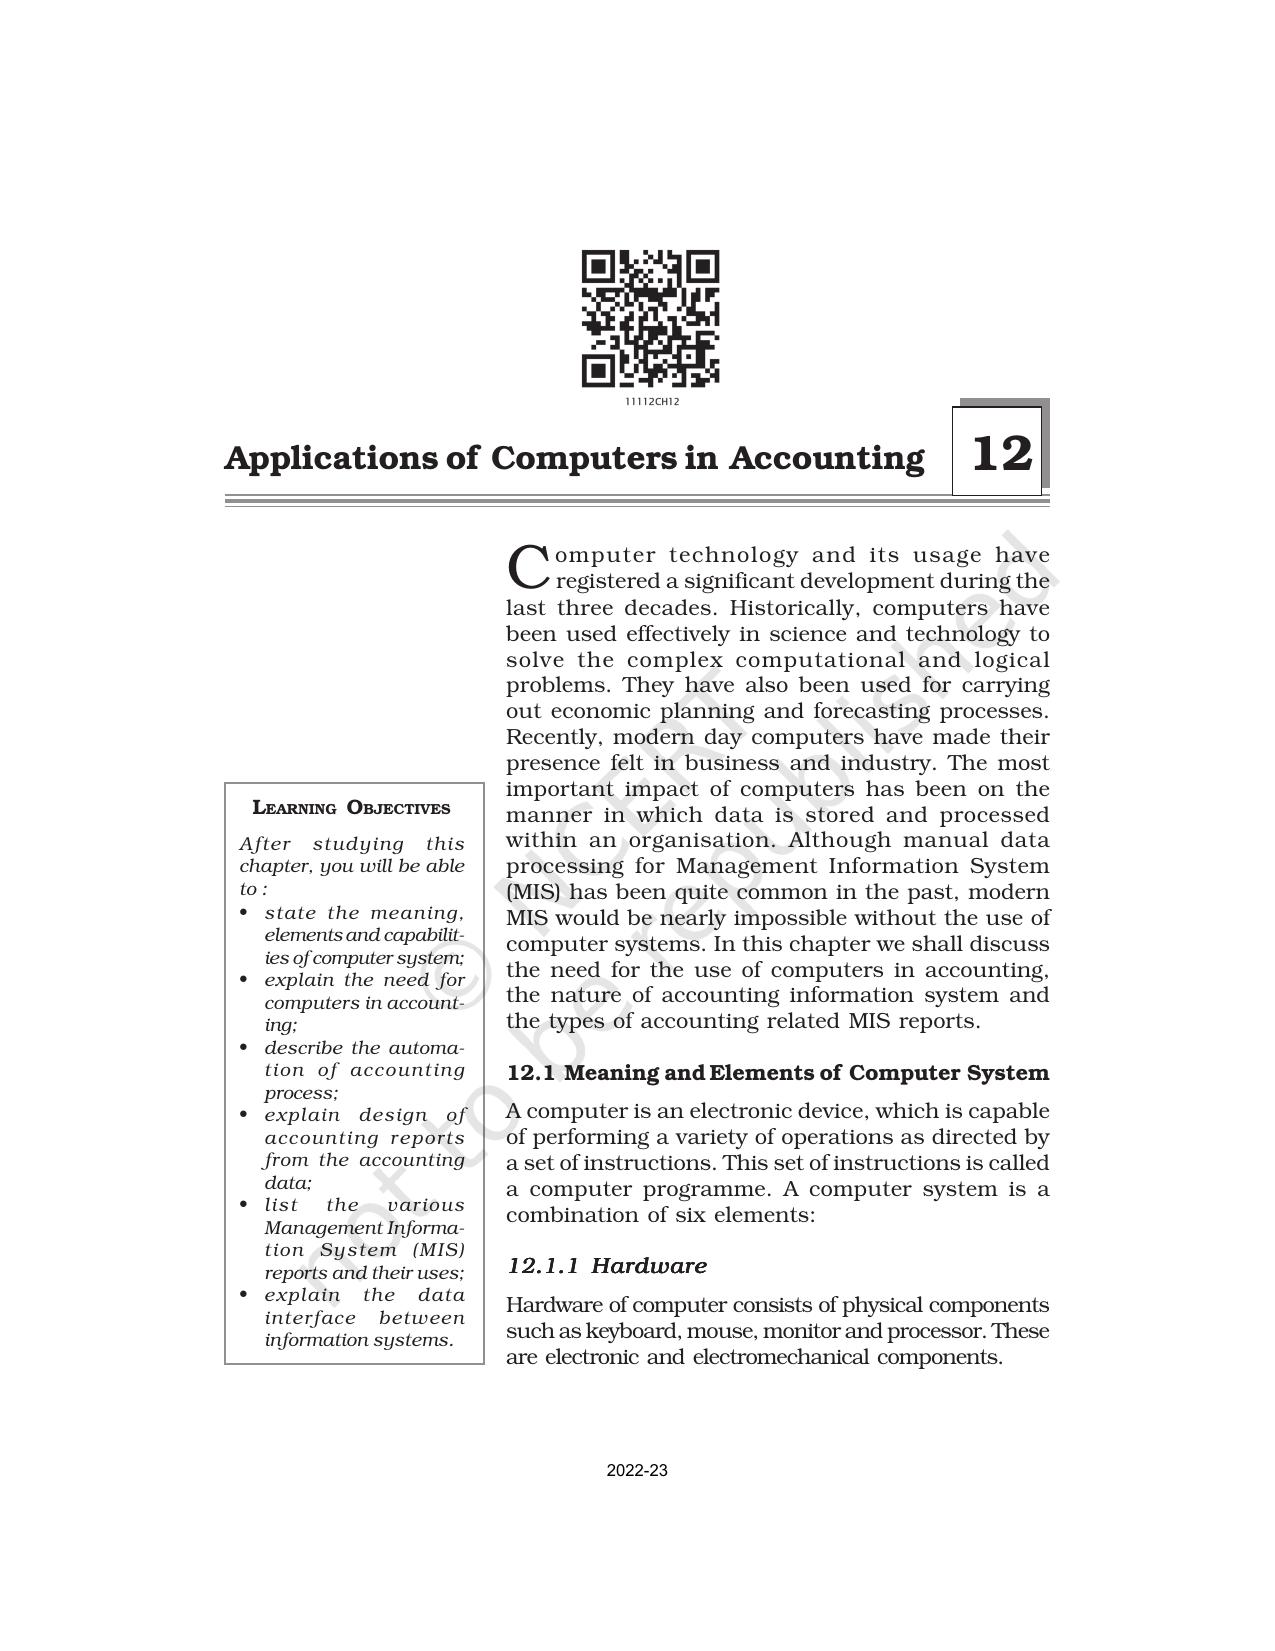 NCERT Book for Class 11 Accountancy (Part-II) Chapter 12 Applications of Computers in Accounting - Page 1